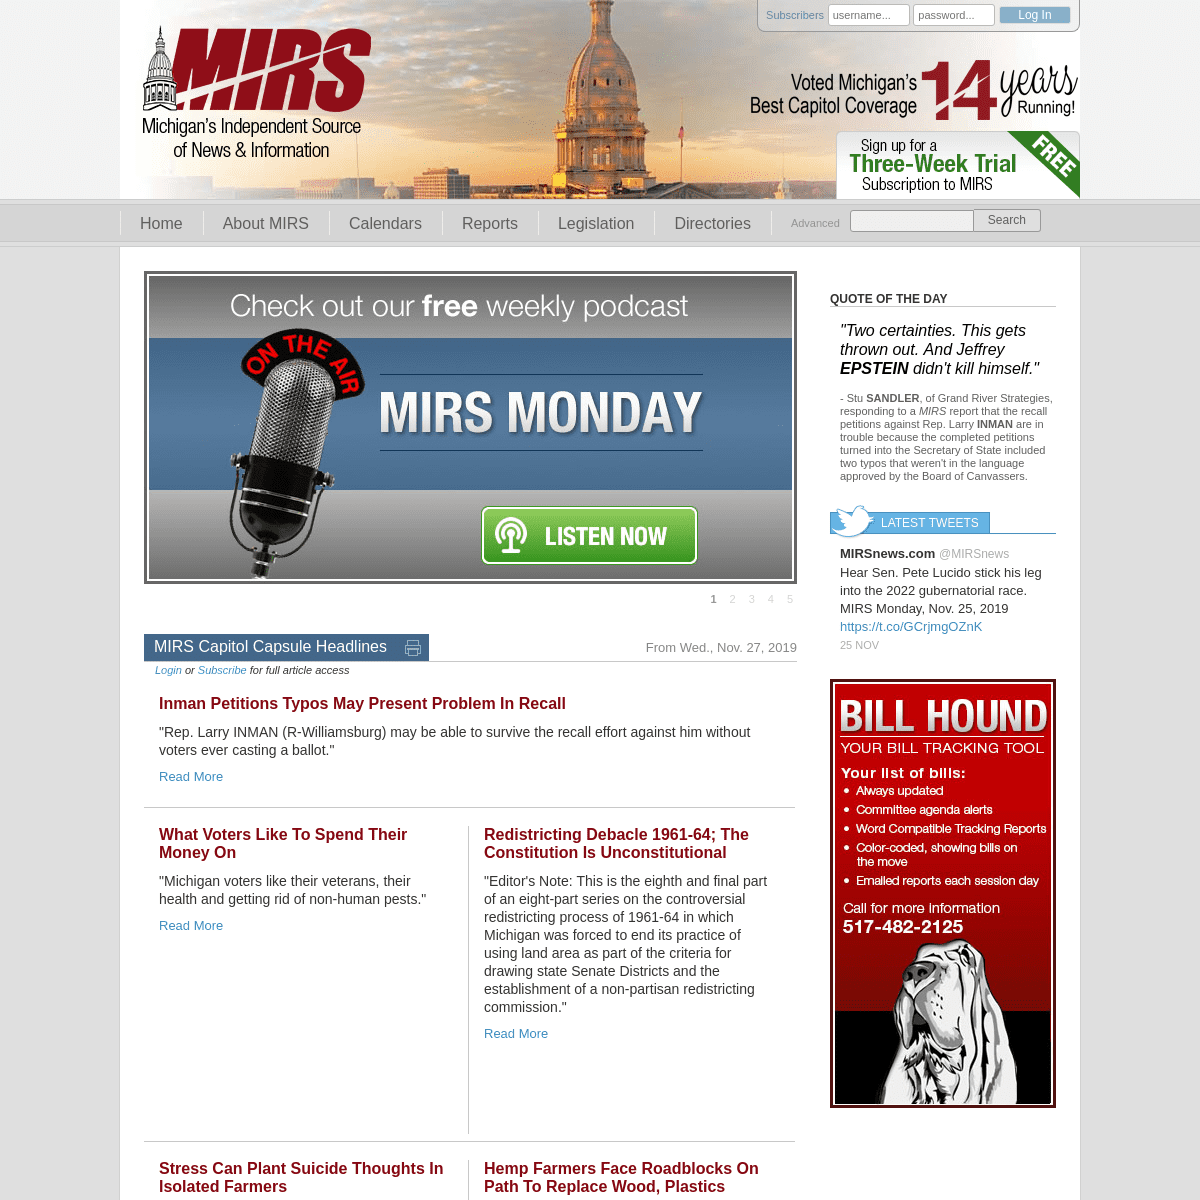 A complete backup of mirsnews.com